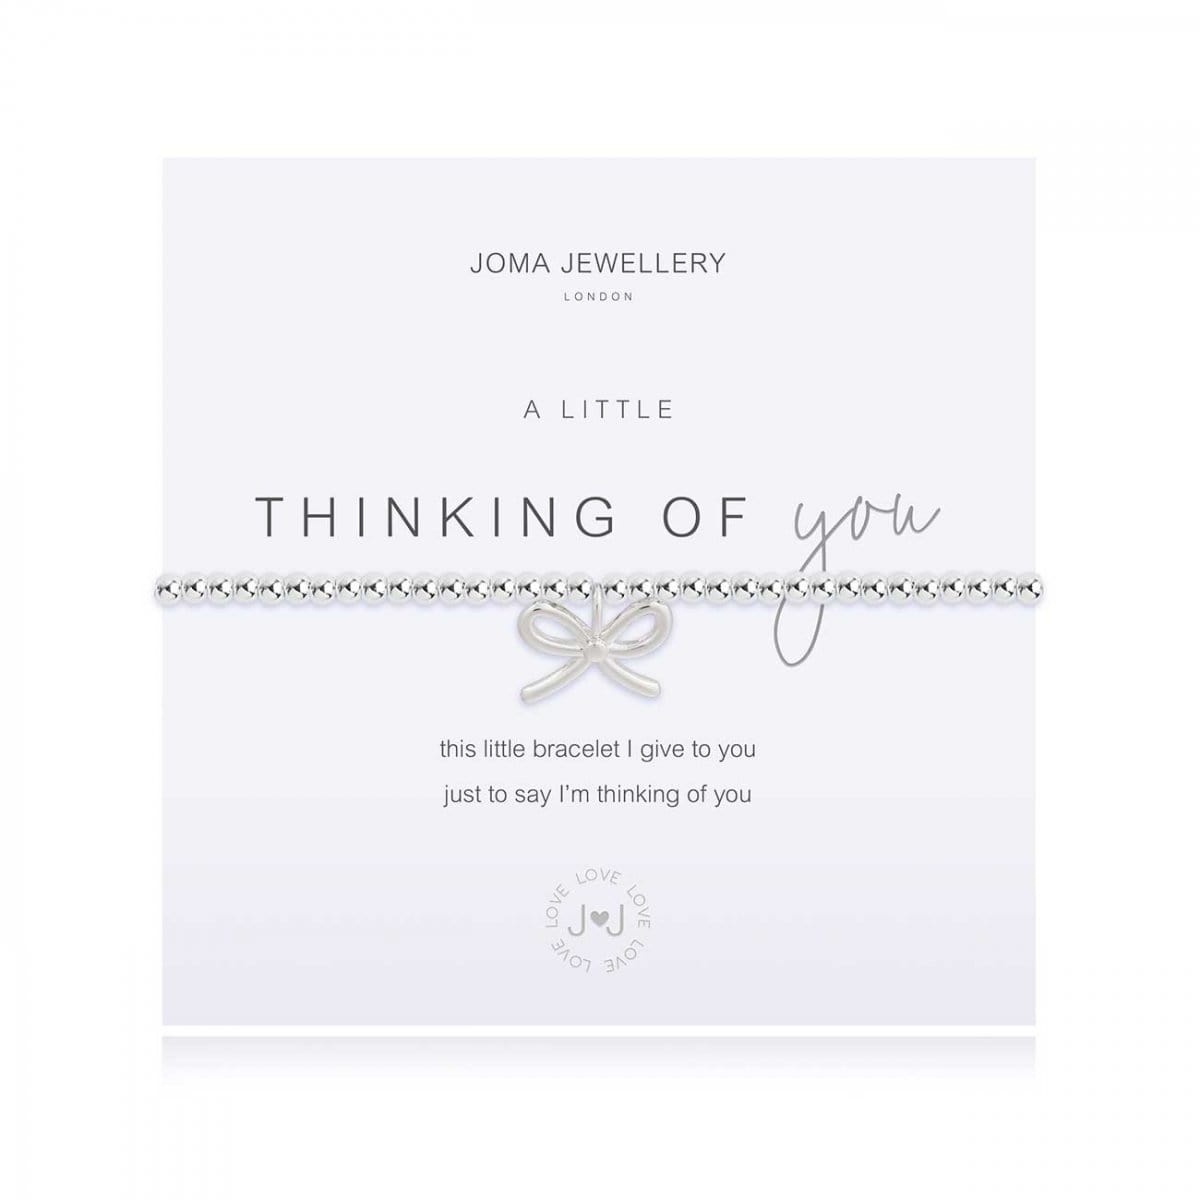 Joma Jewellery Bracelet Joma Jewellery Bracelet - a little Thinking Of You